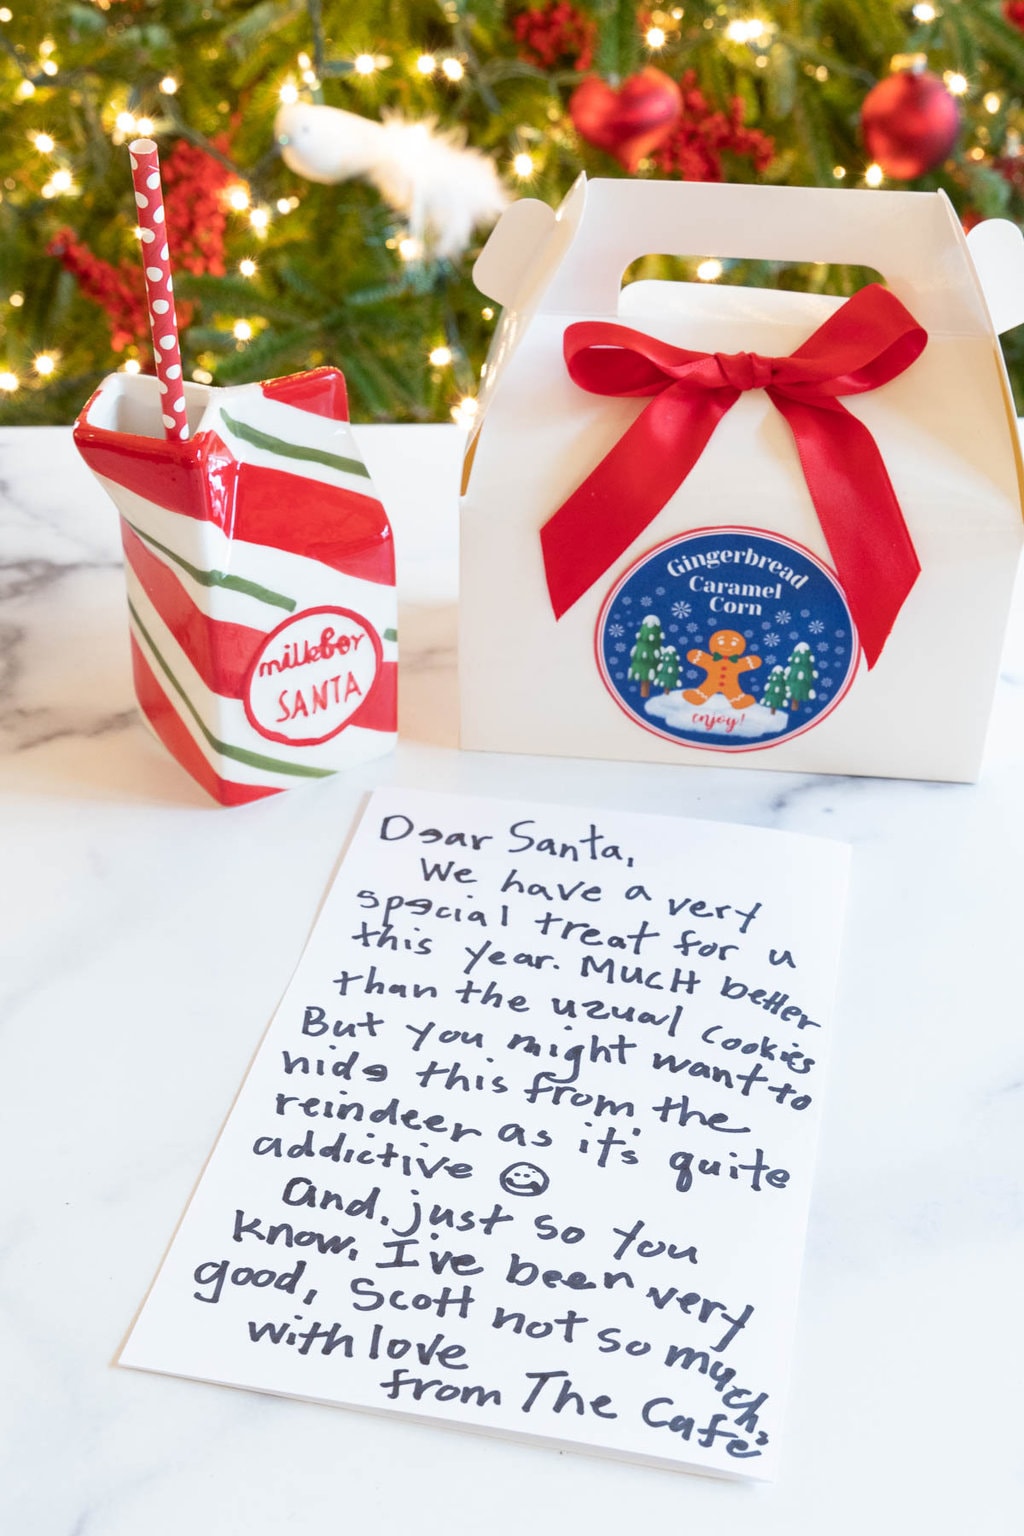 Vertical photo of a gift box of Ridiculously Easy Gingerbread Caramel Corn with a custom label and a letter to Santa from The Café.